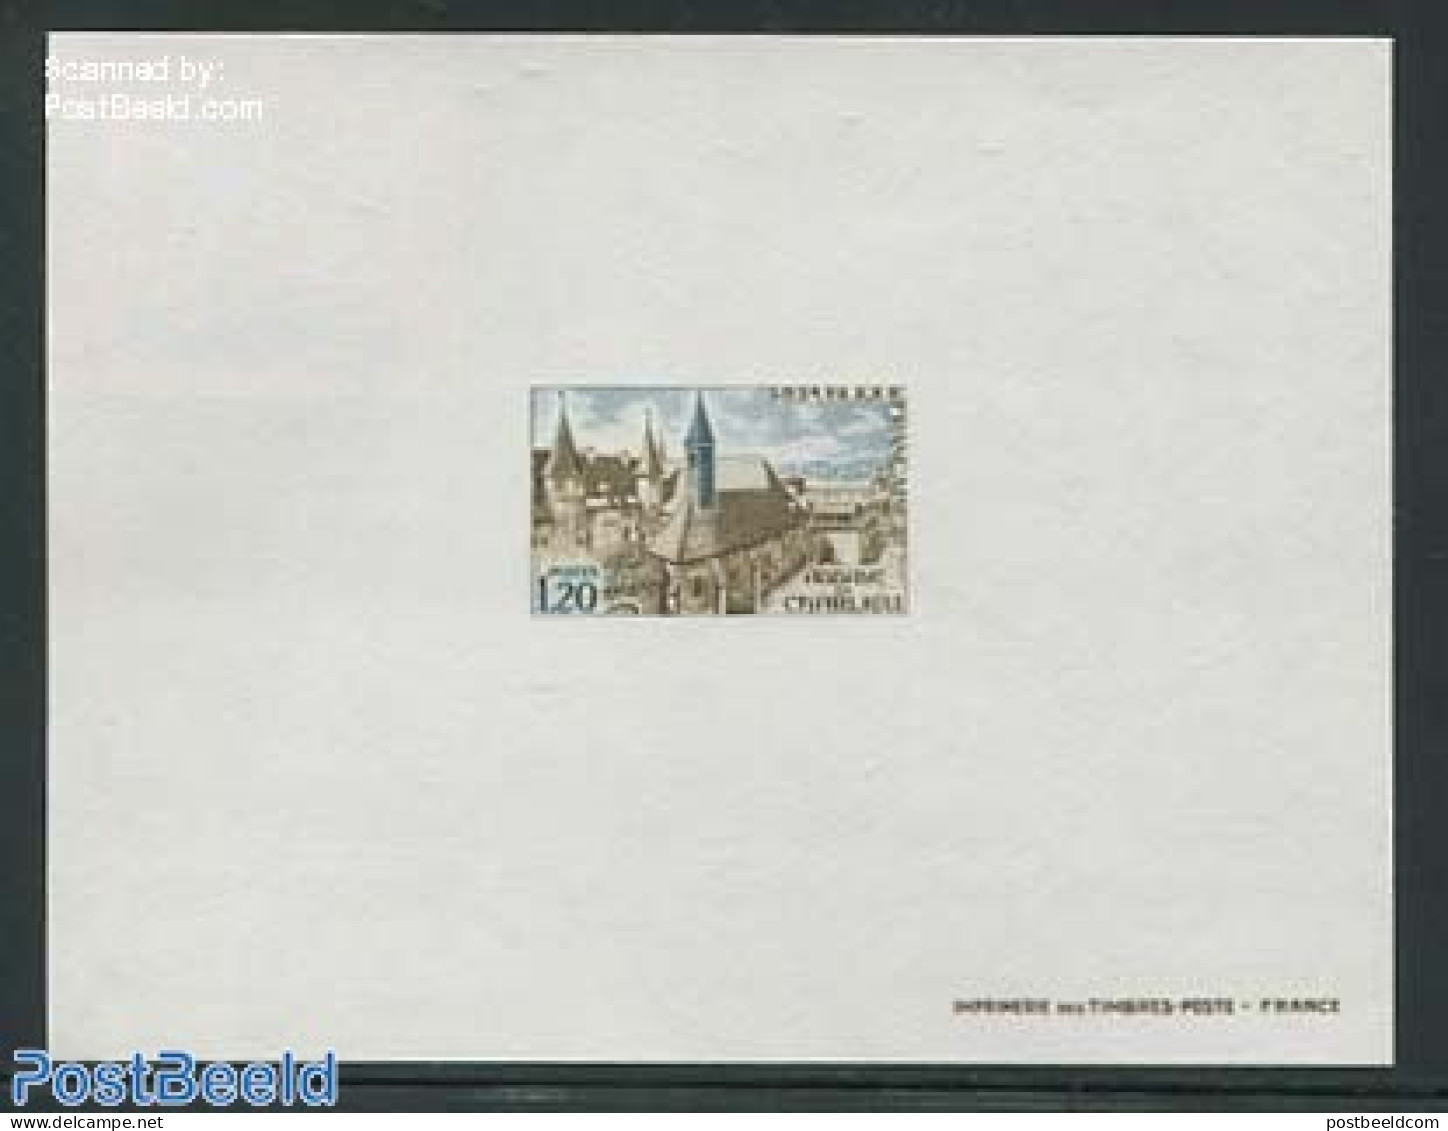 France 1972 Charlieu 1v, Epreuve De Luxe, Mint NH, Religion - Churches, Temples, Mosques, Synagogues - Cloisters & Abb.. - Neufs